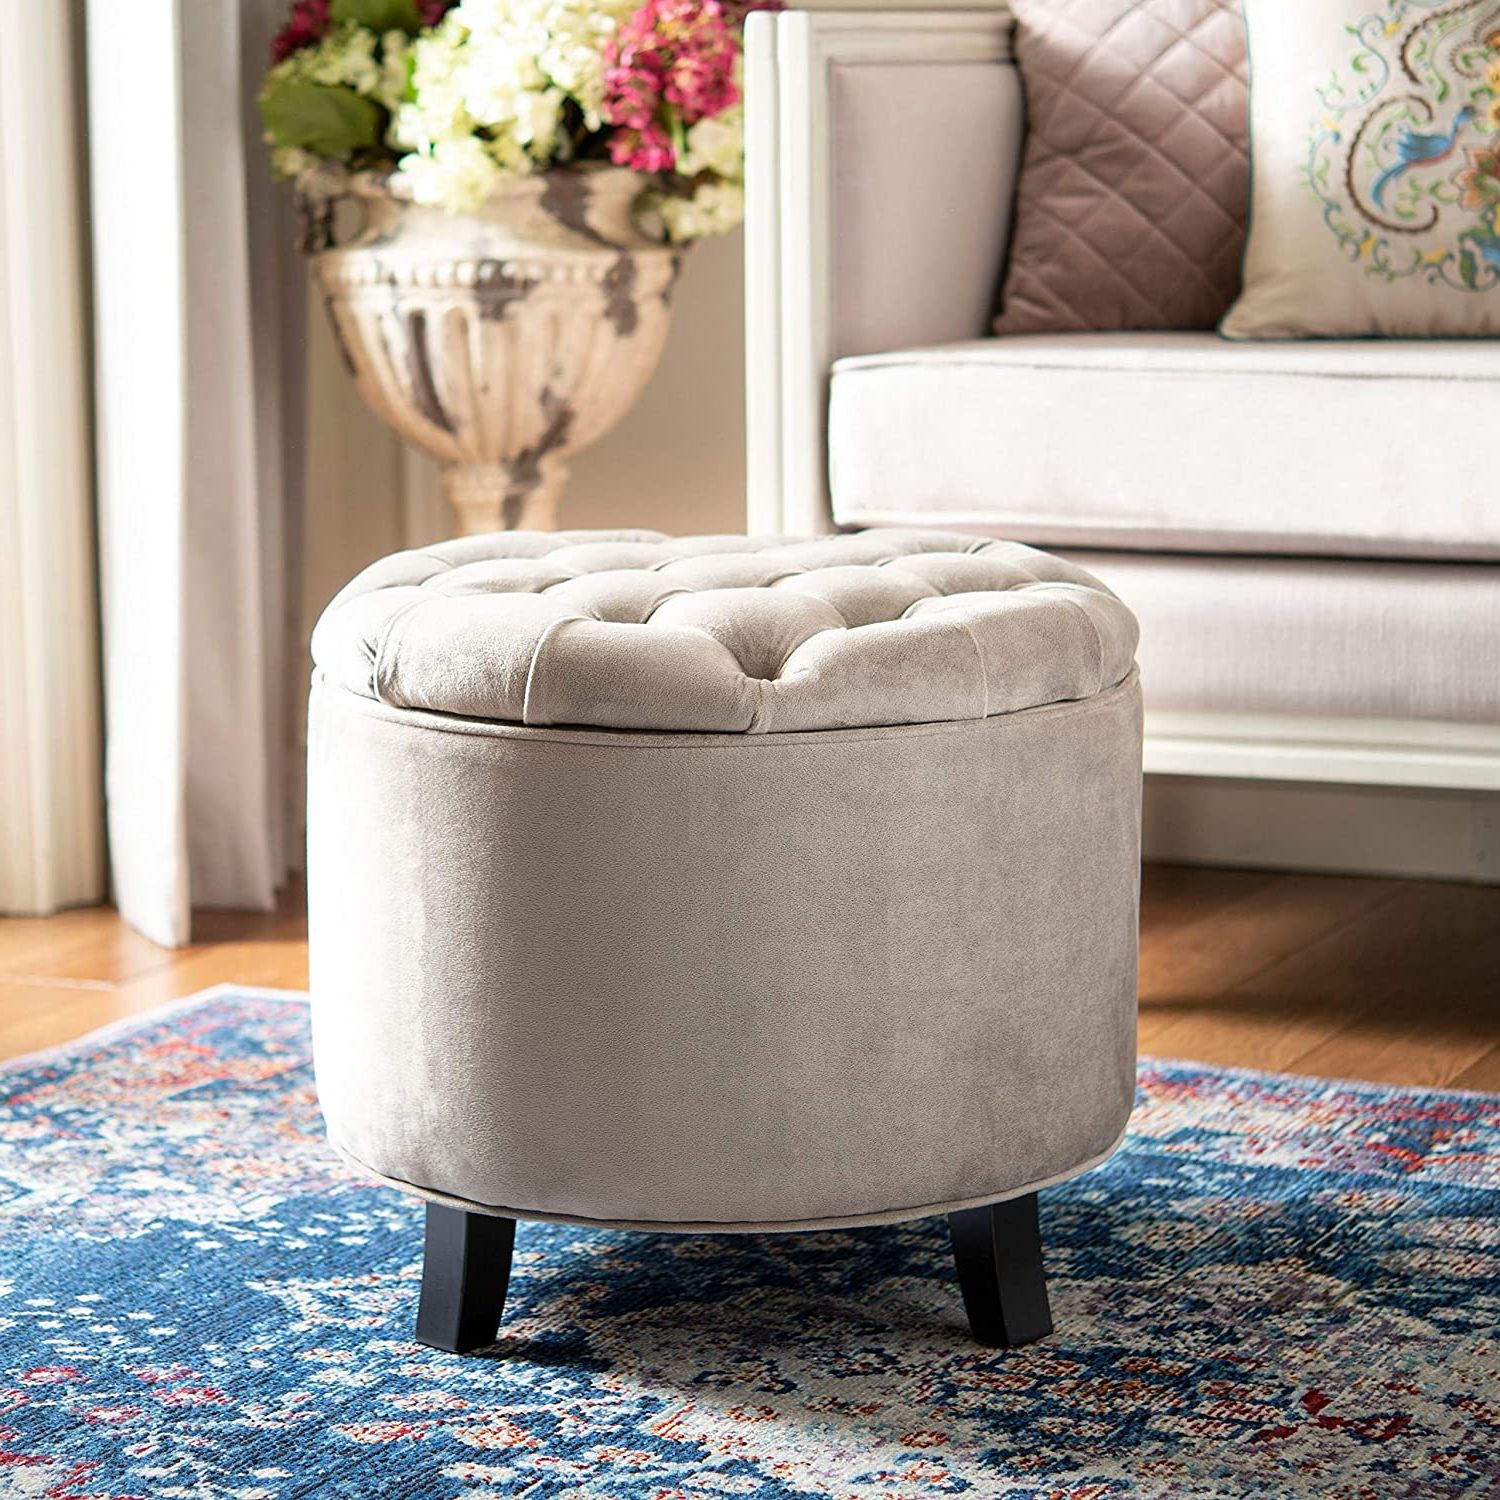 Amazon: Mushroom Taupe Tufted Storage Ottoman Brown French Country Throughout Famous Velvet Ribbed Fabric Round Storage Ottomans (View 2 of 10)